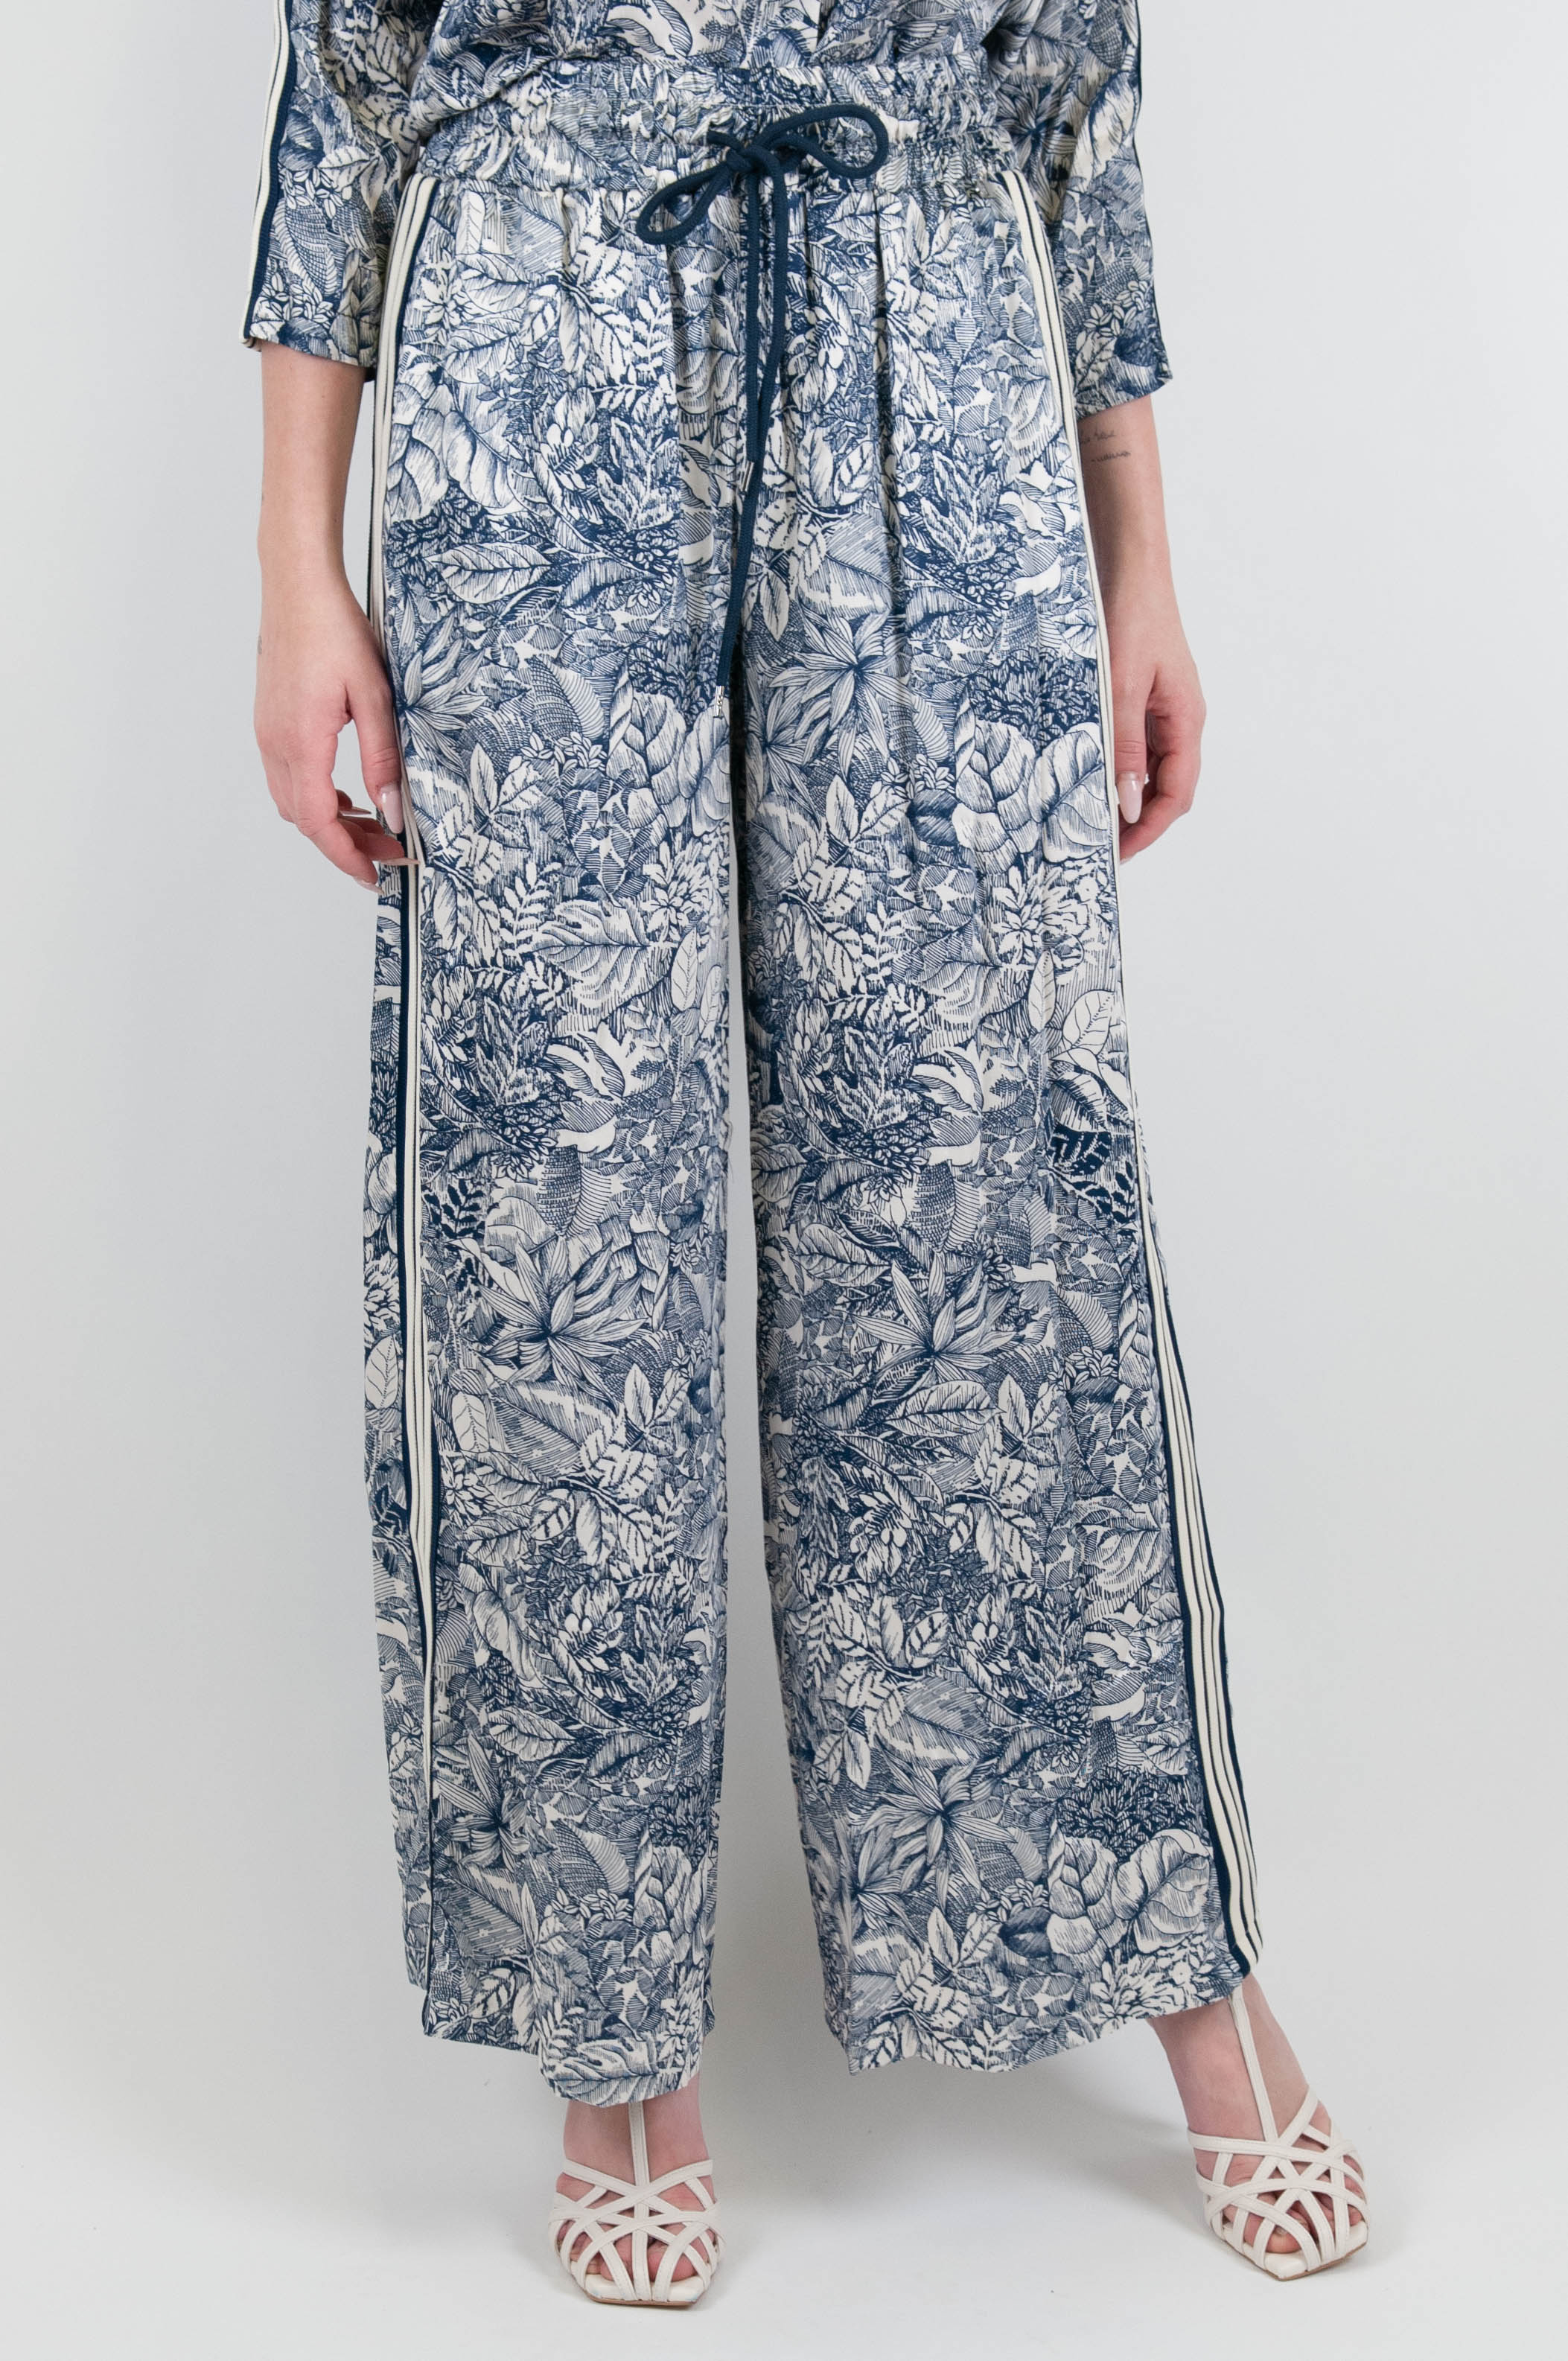 Dixie - Floral patterned viscose trousers with contrasting side band